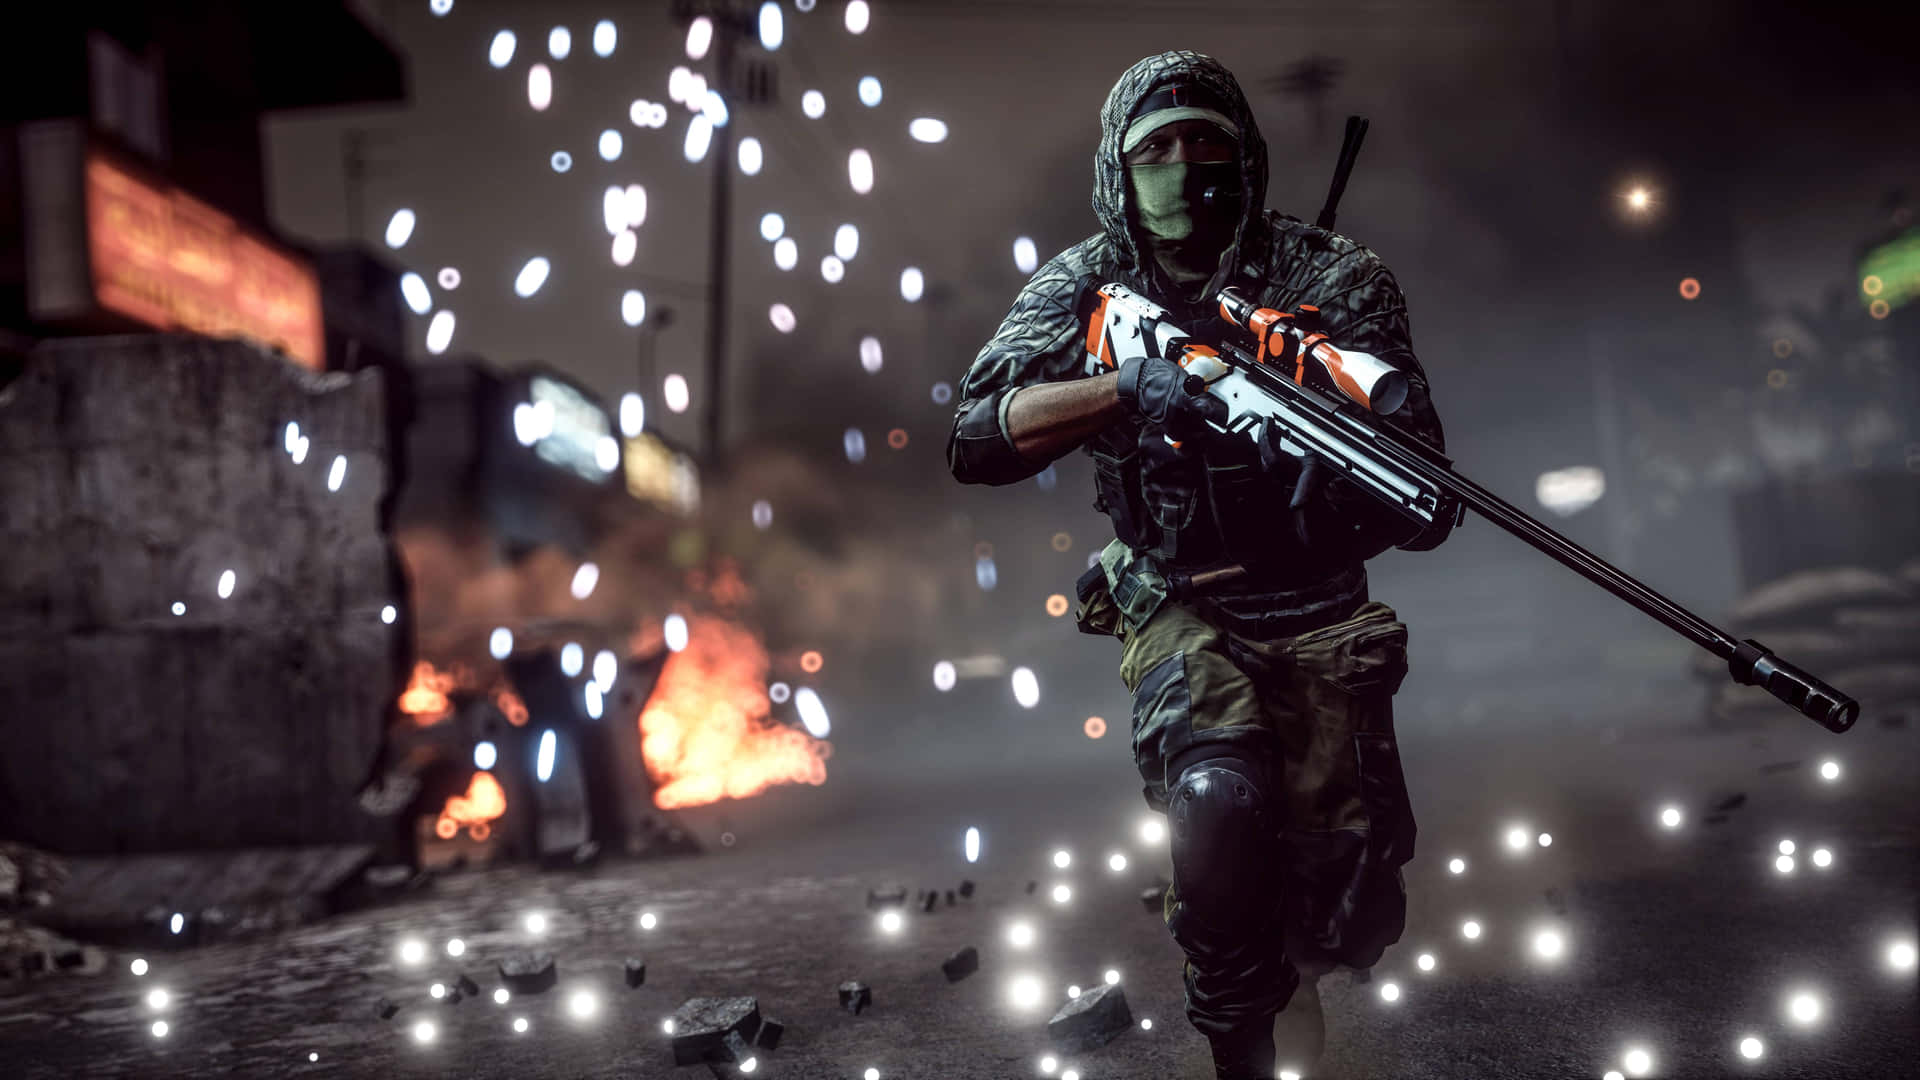 Experience the intense thrill of the Battlefield 4 on consoles and PC